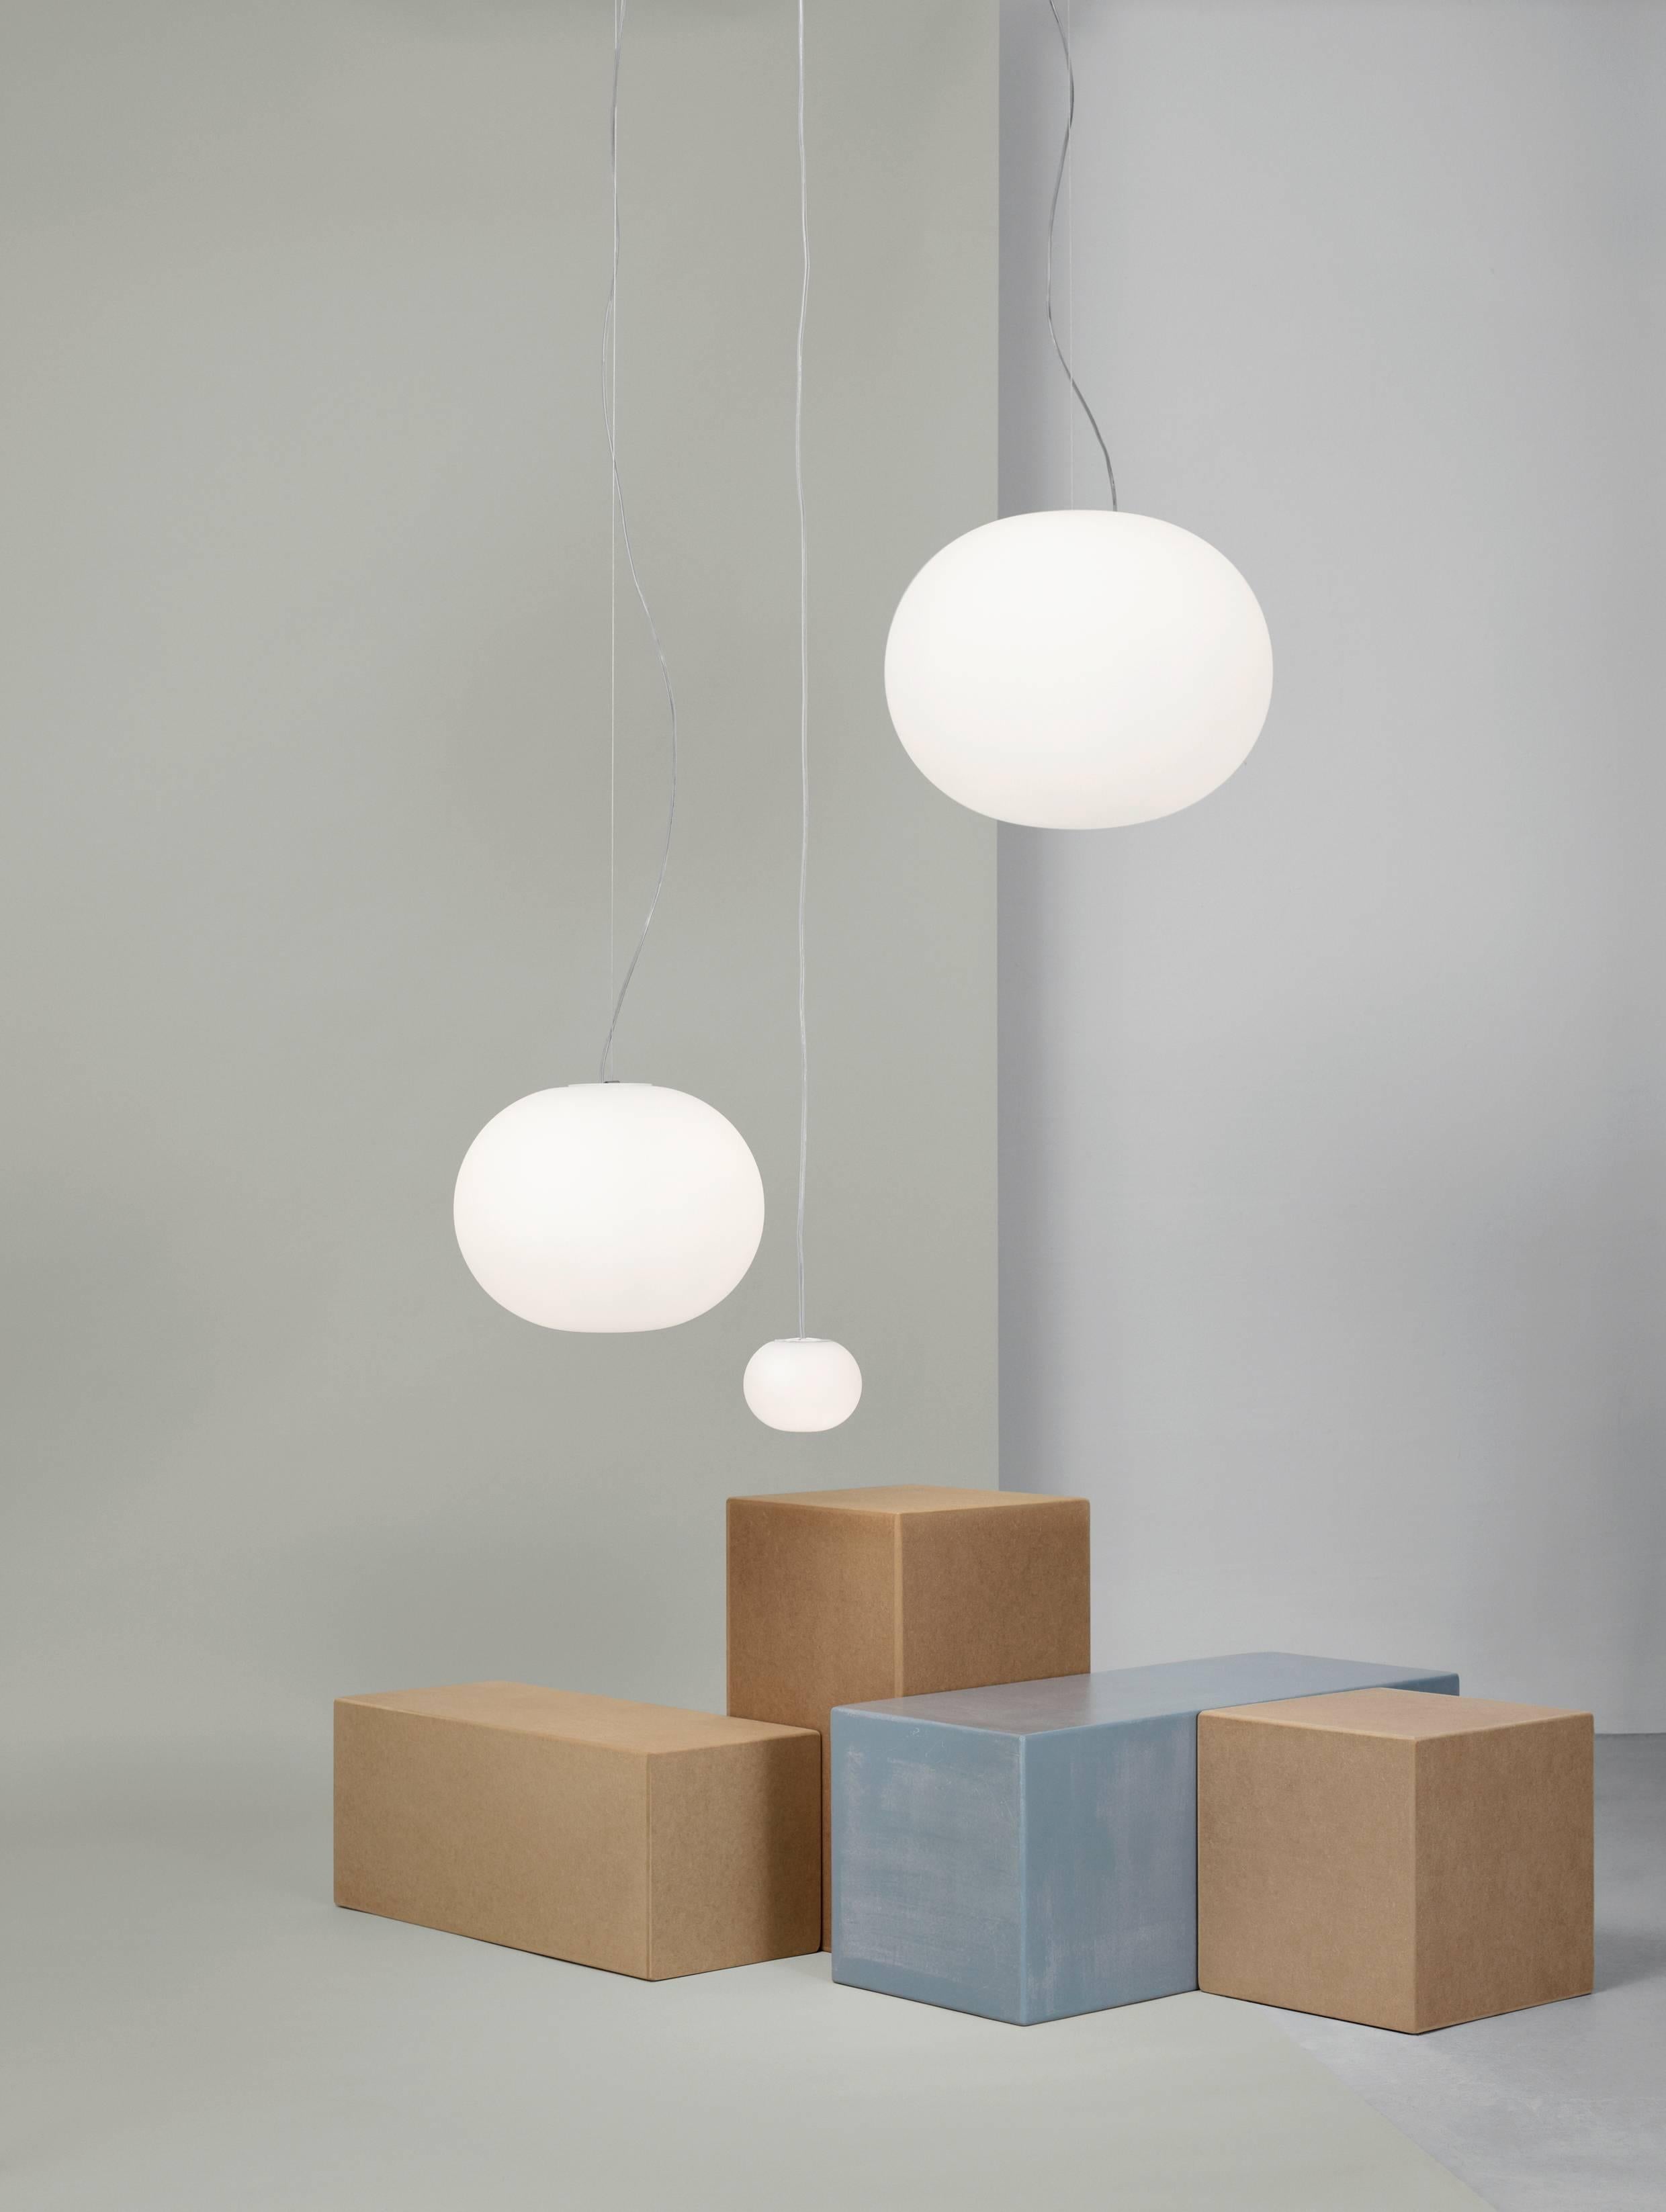 FLOS Glo-Ball S2 Halogen Pendant Light by Jasper Morrison
Marrying the functional with the otherworldly, the Glo-Ball S by Jasper Morrison is a remarkably versatile design that punctuates any room it is featured in. Its diffuser is made of